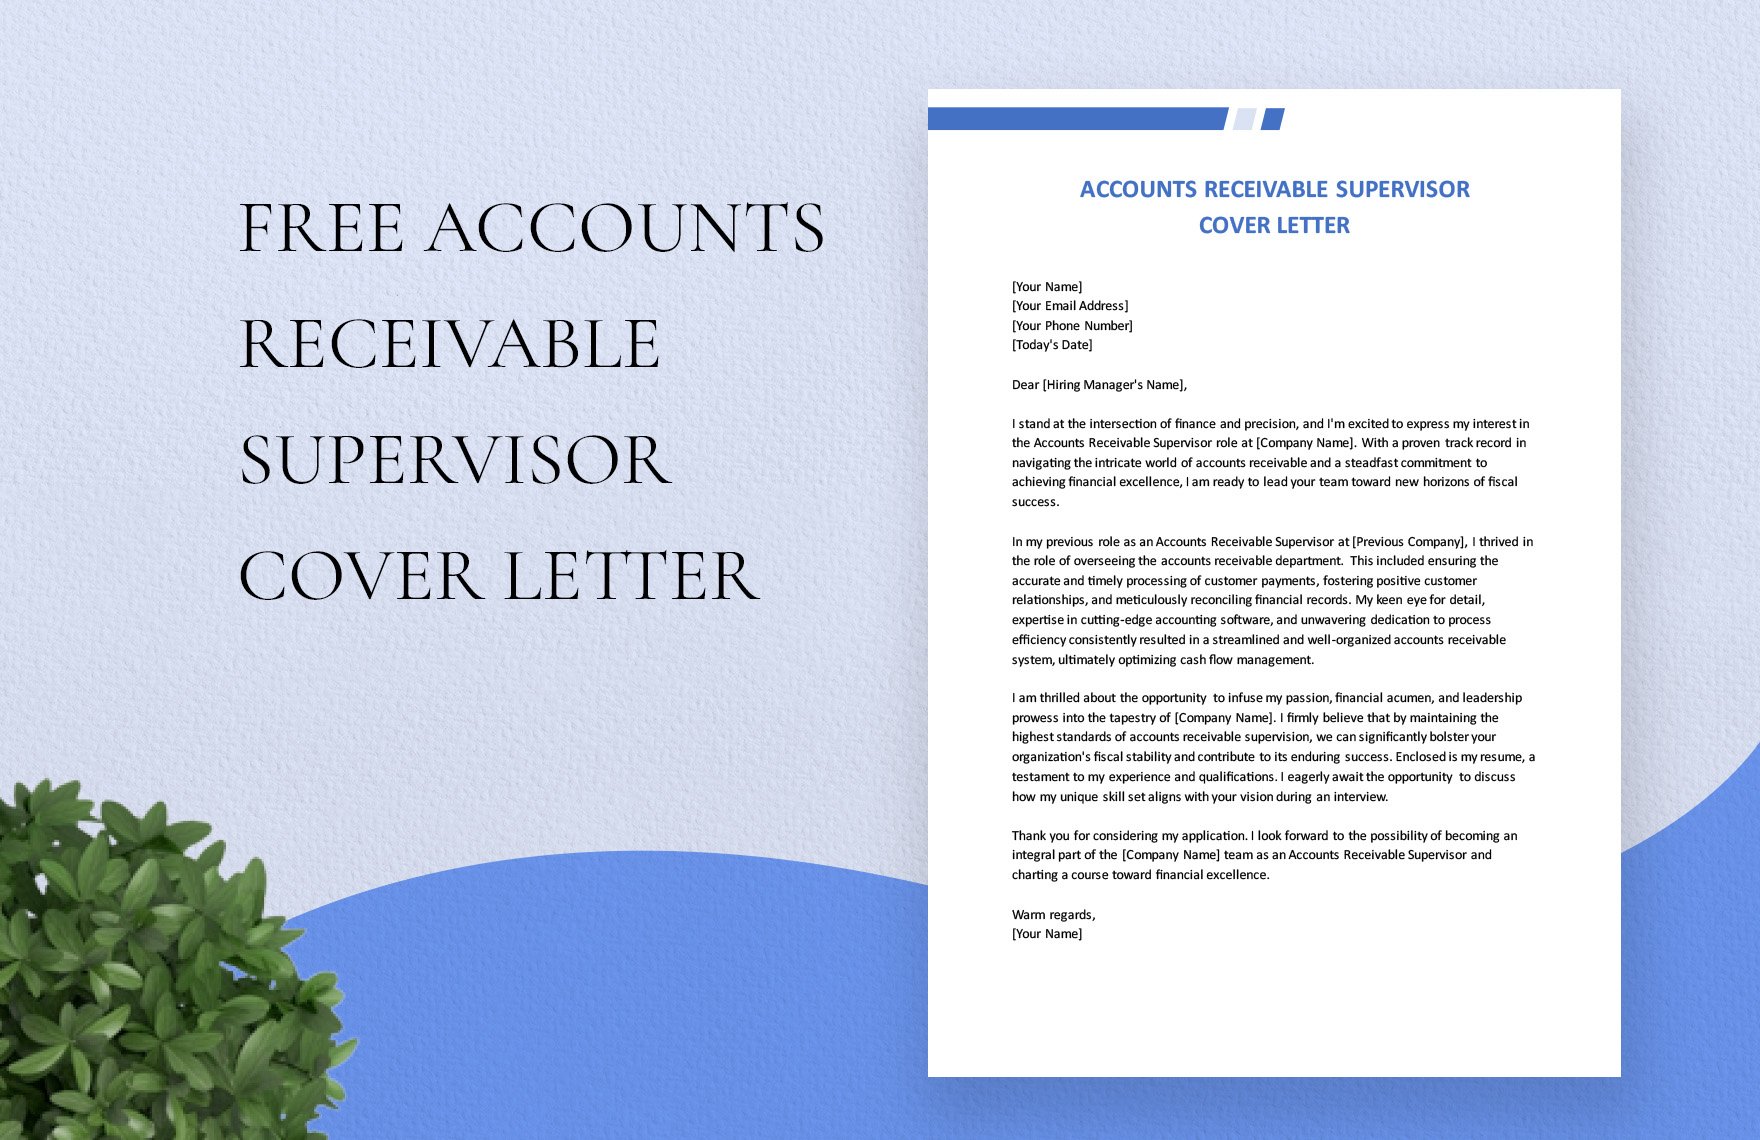 Accounts Receivable Supervisor Cover Letter in Word, Google Docs, PDF